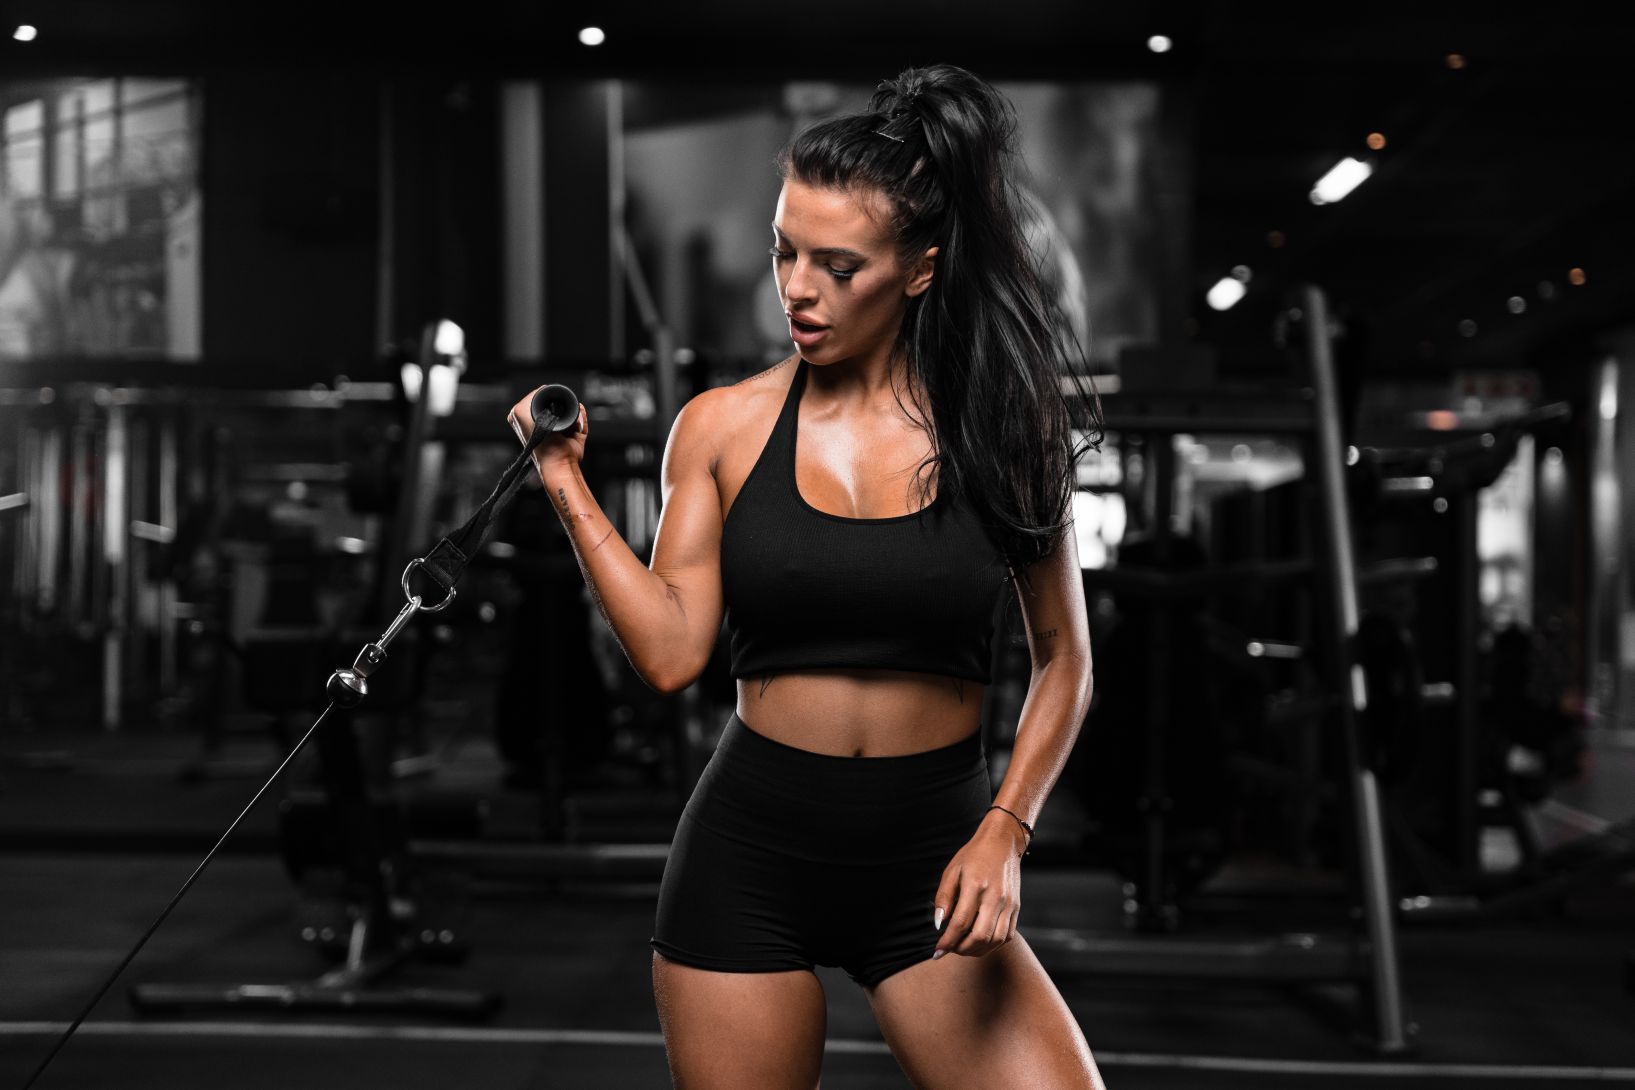 Fit female in black sports bra and shorts doing bicep curl